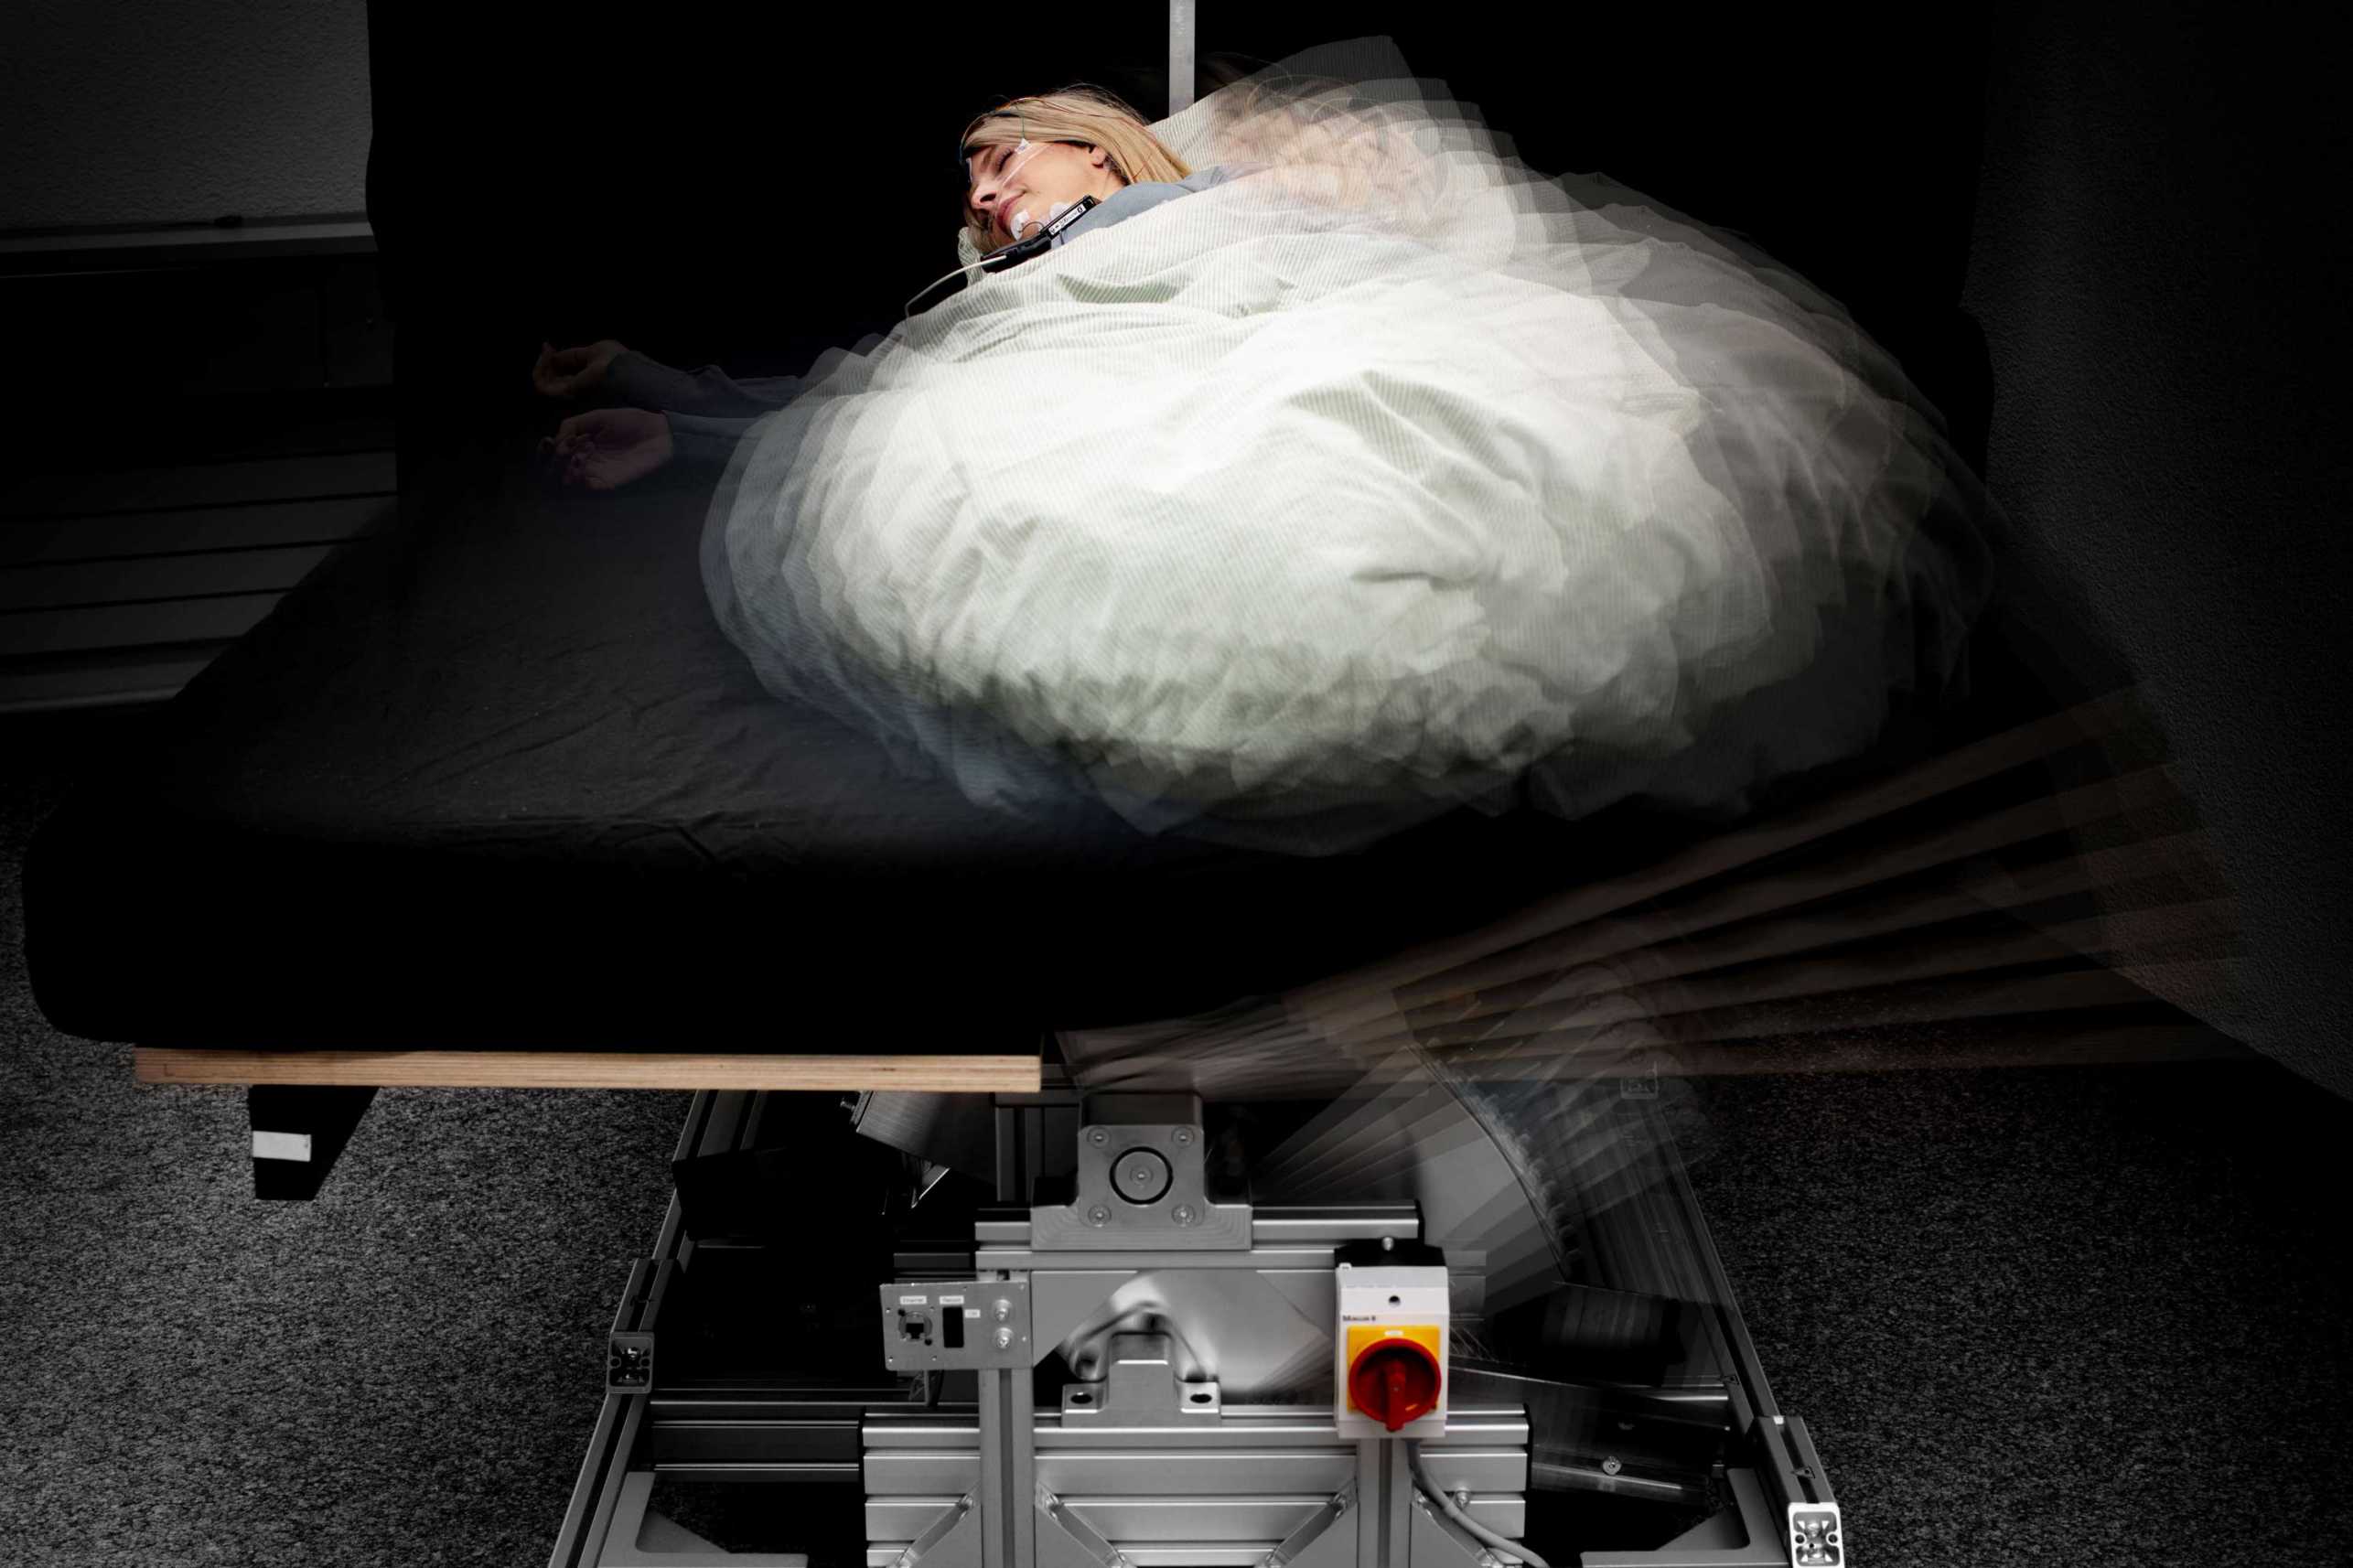 Enlarged view: Robotic beds that incline the backrest or move the bed-halves to change the position of the user may be used as novel intervention devices for people with position-dependent sleep-related breathing disorders.